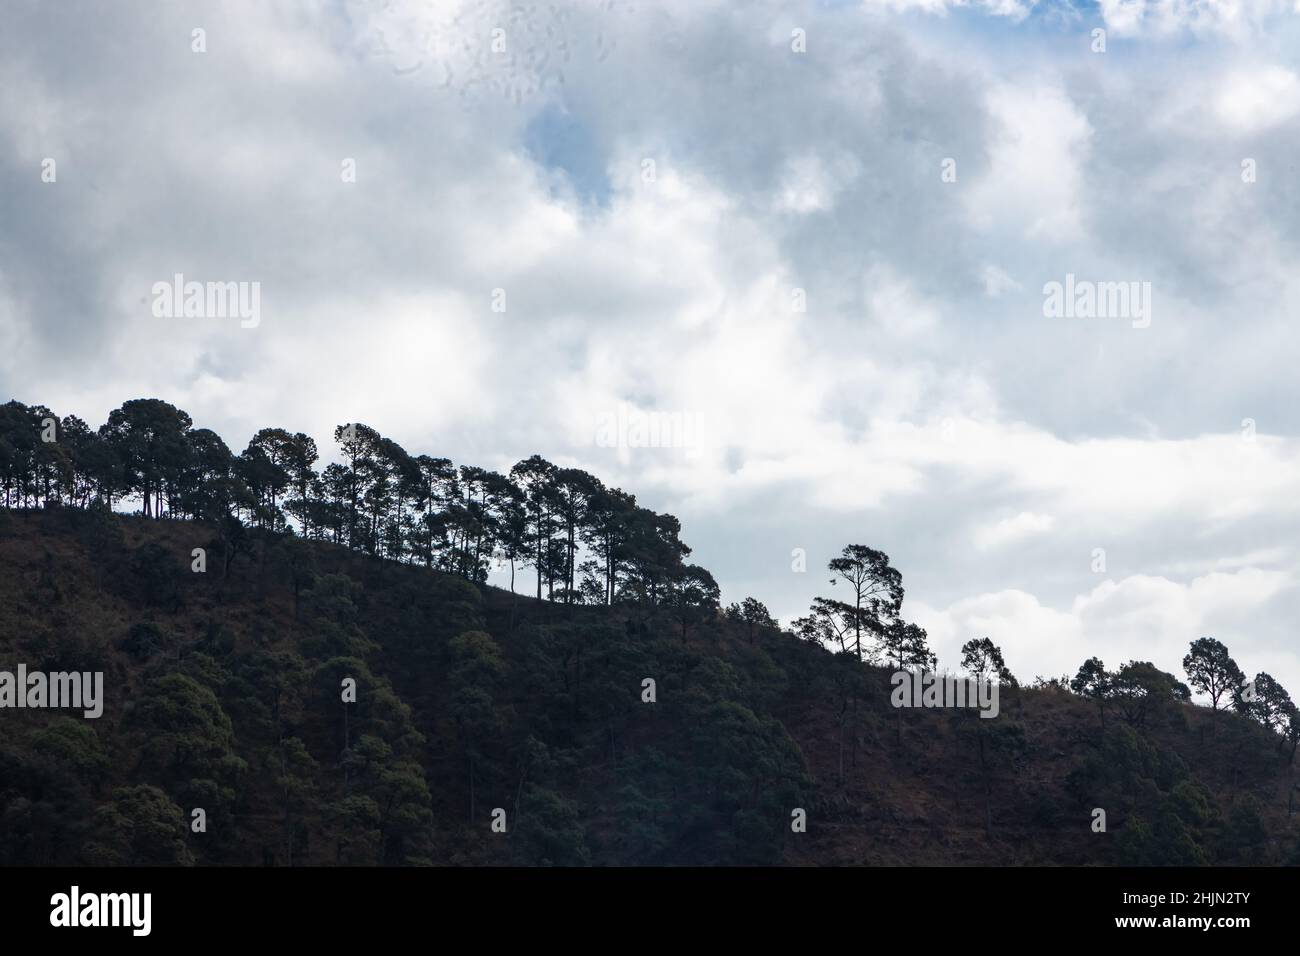 Row of trees on top of a hill with clouds forming in the background Stock Photo